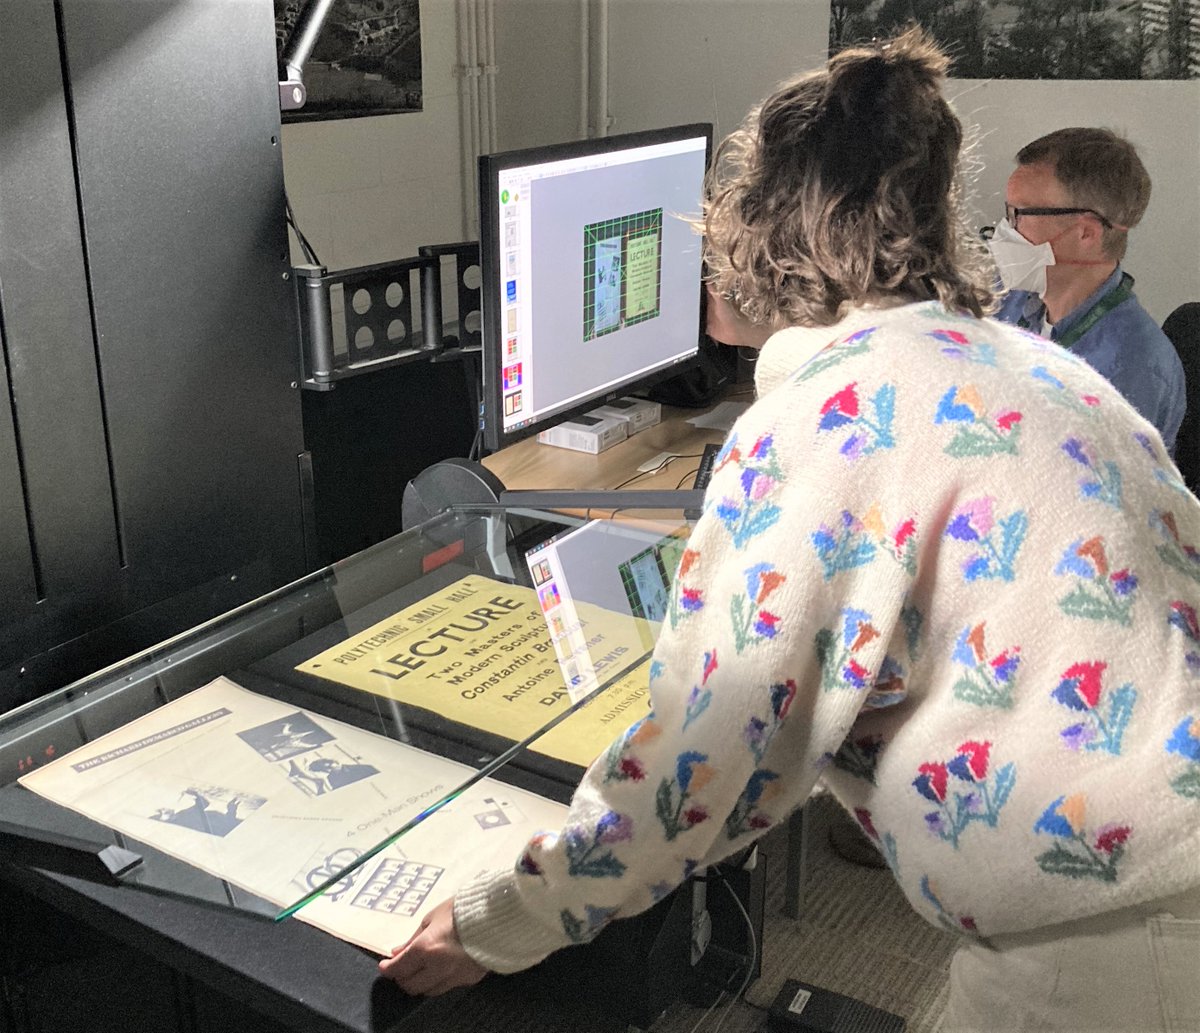 We have been busy digitising the WBGT poster collection, with generous help from Karl Magee, Archivist at @StirlingCampus. The posters are for WBG’s 1968 show at Richard Demarco Gallery, Edinburgh & a lecture given by David Lewis in Falmouth on Brancusi and Pevsner in the 1950s.